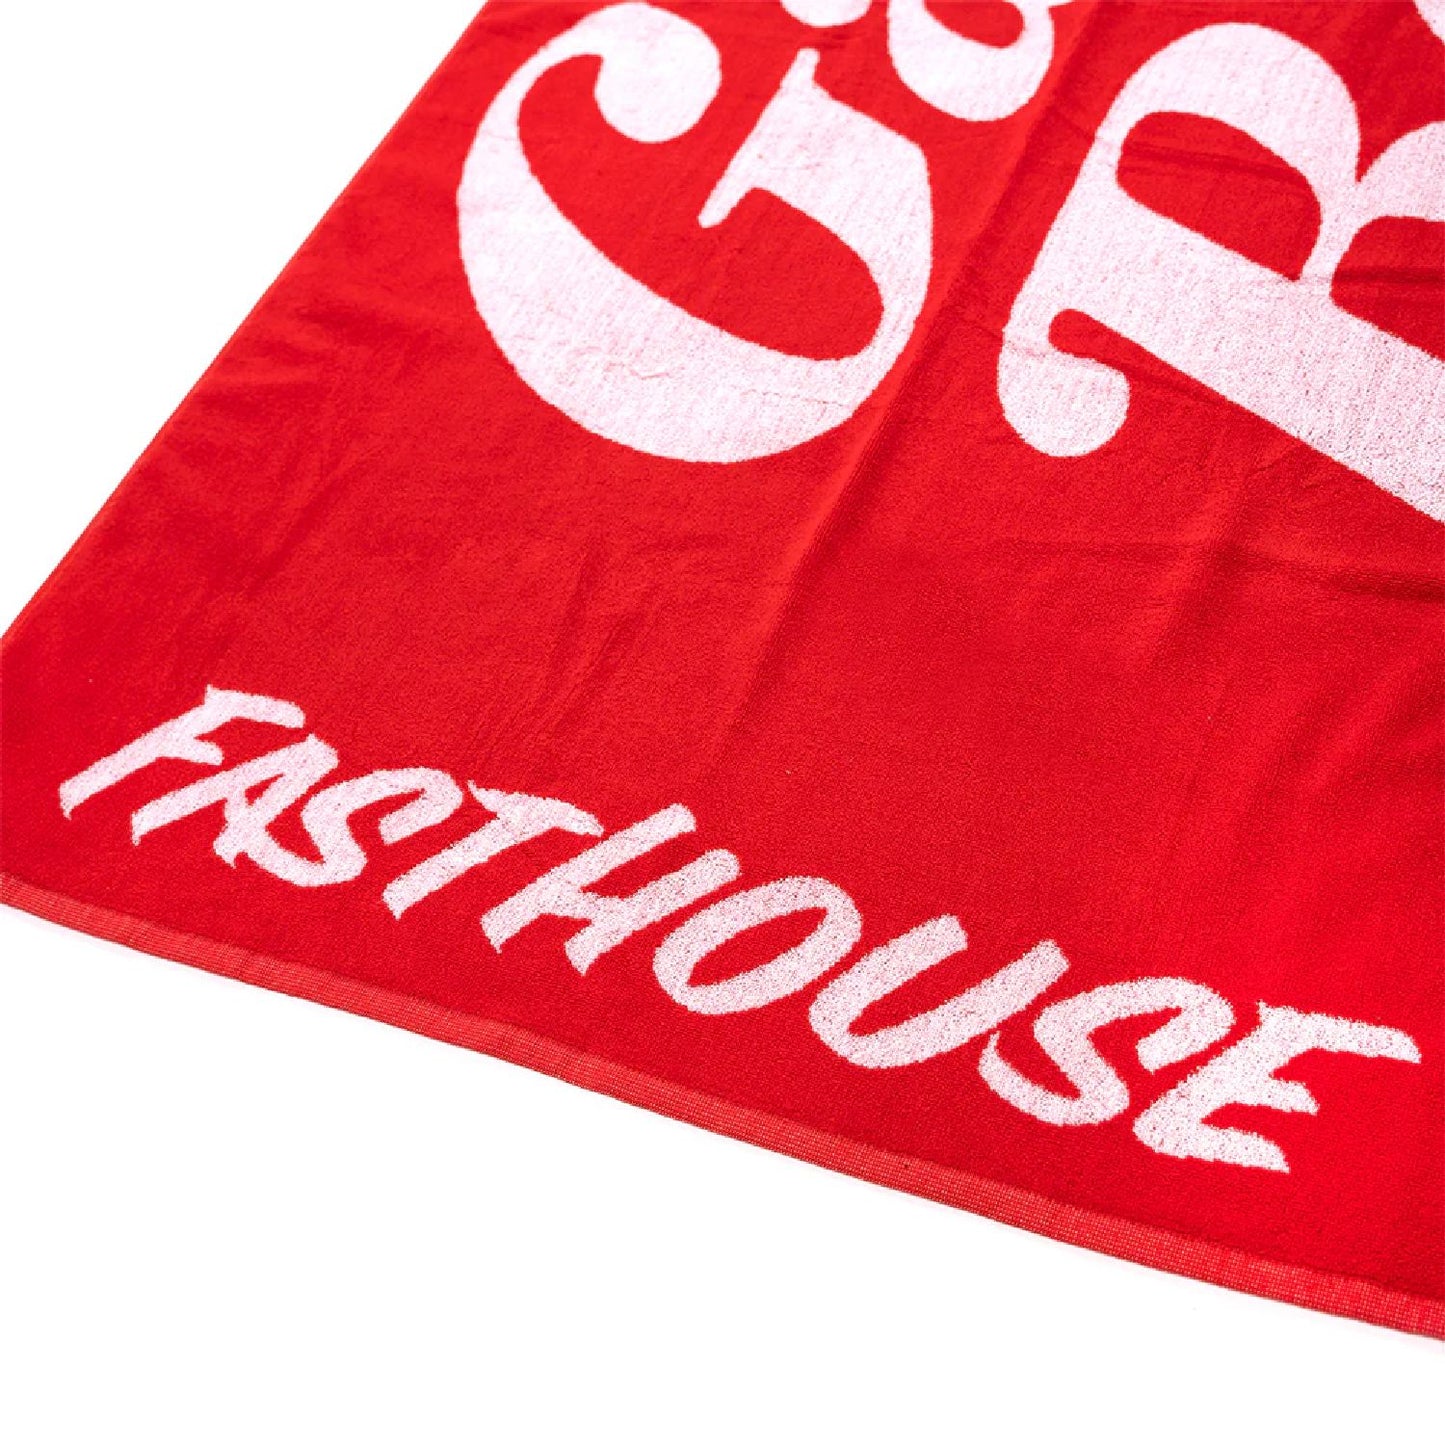 Fasthouse Gas & Beer Towel Red OS - Fasthouse Accessories